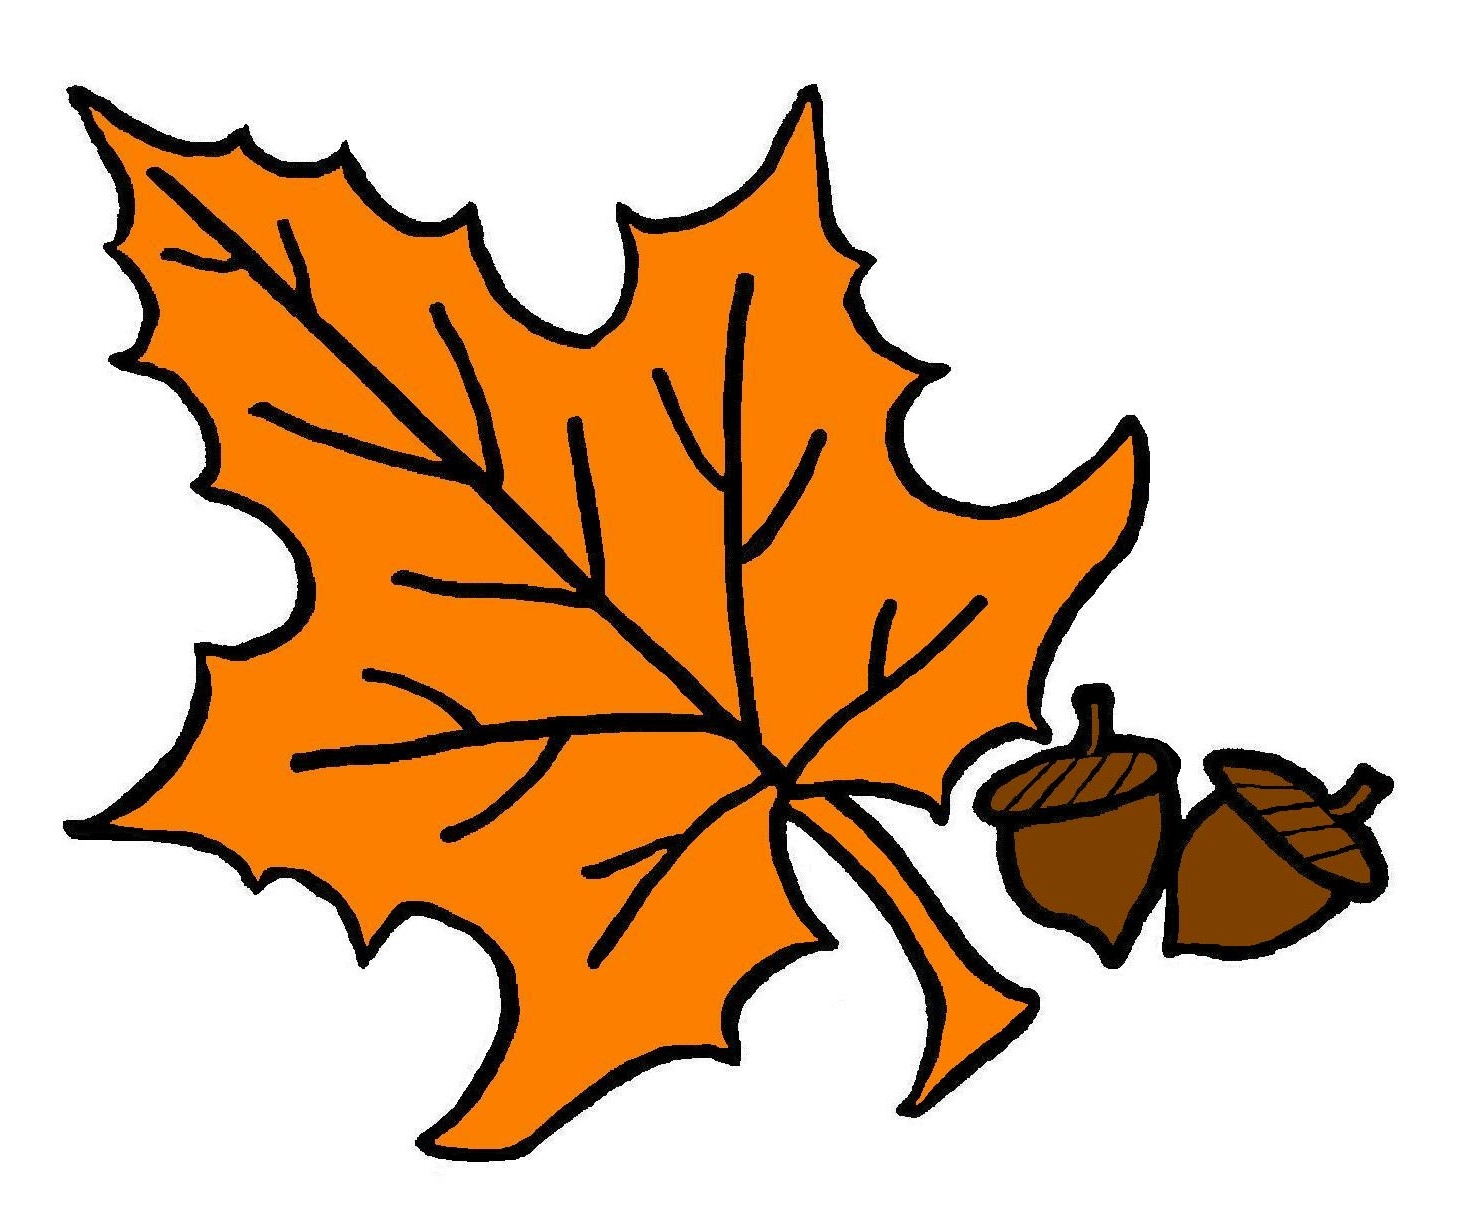 fall-leaves-3-coloring-page-free-printable-coloring-pages-for-kids